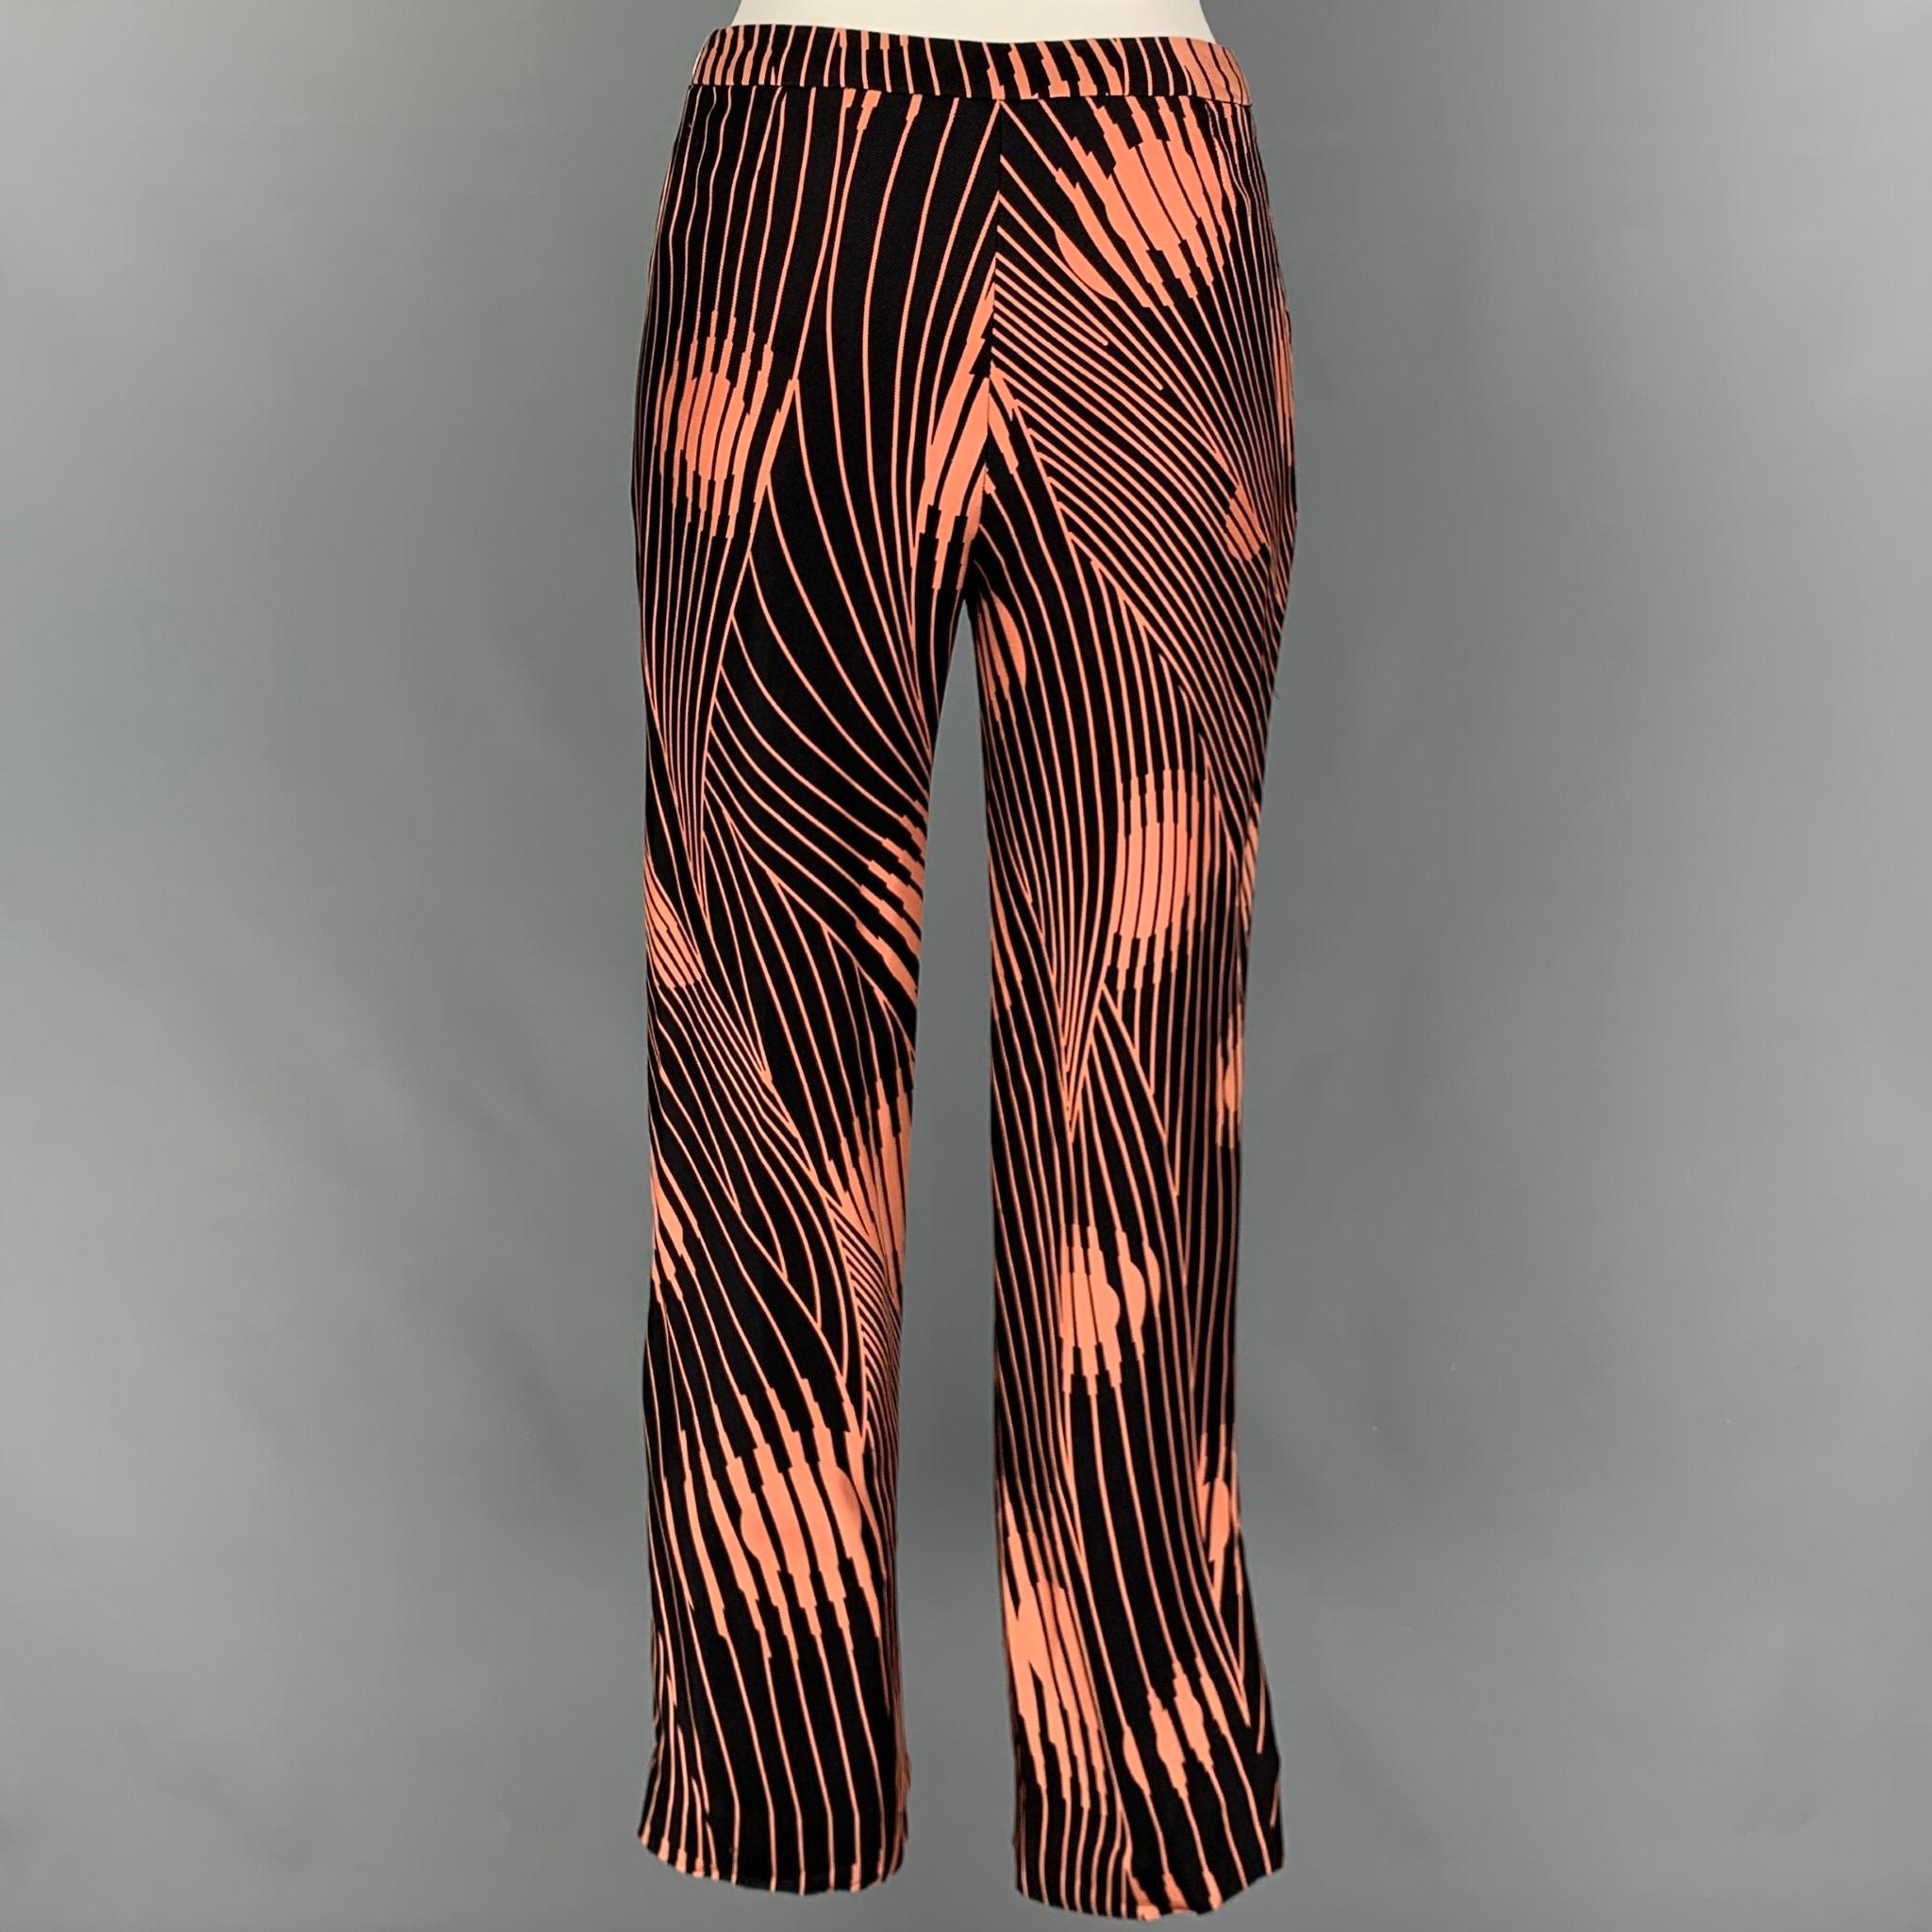 GIANNI VERSACE pants comes in a black & coral abstract print material featuring a flat front, front tab, and a zip fly closure. Made in Italy. 

Very Good Pre-Owned Condition. Fabric tag removed.
Marked: 40

Measurements:

Waist: 26 in.
Rise: 10